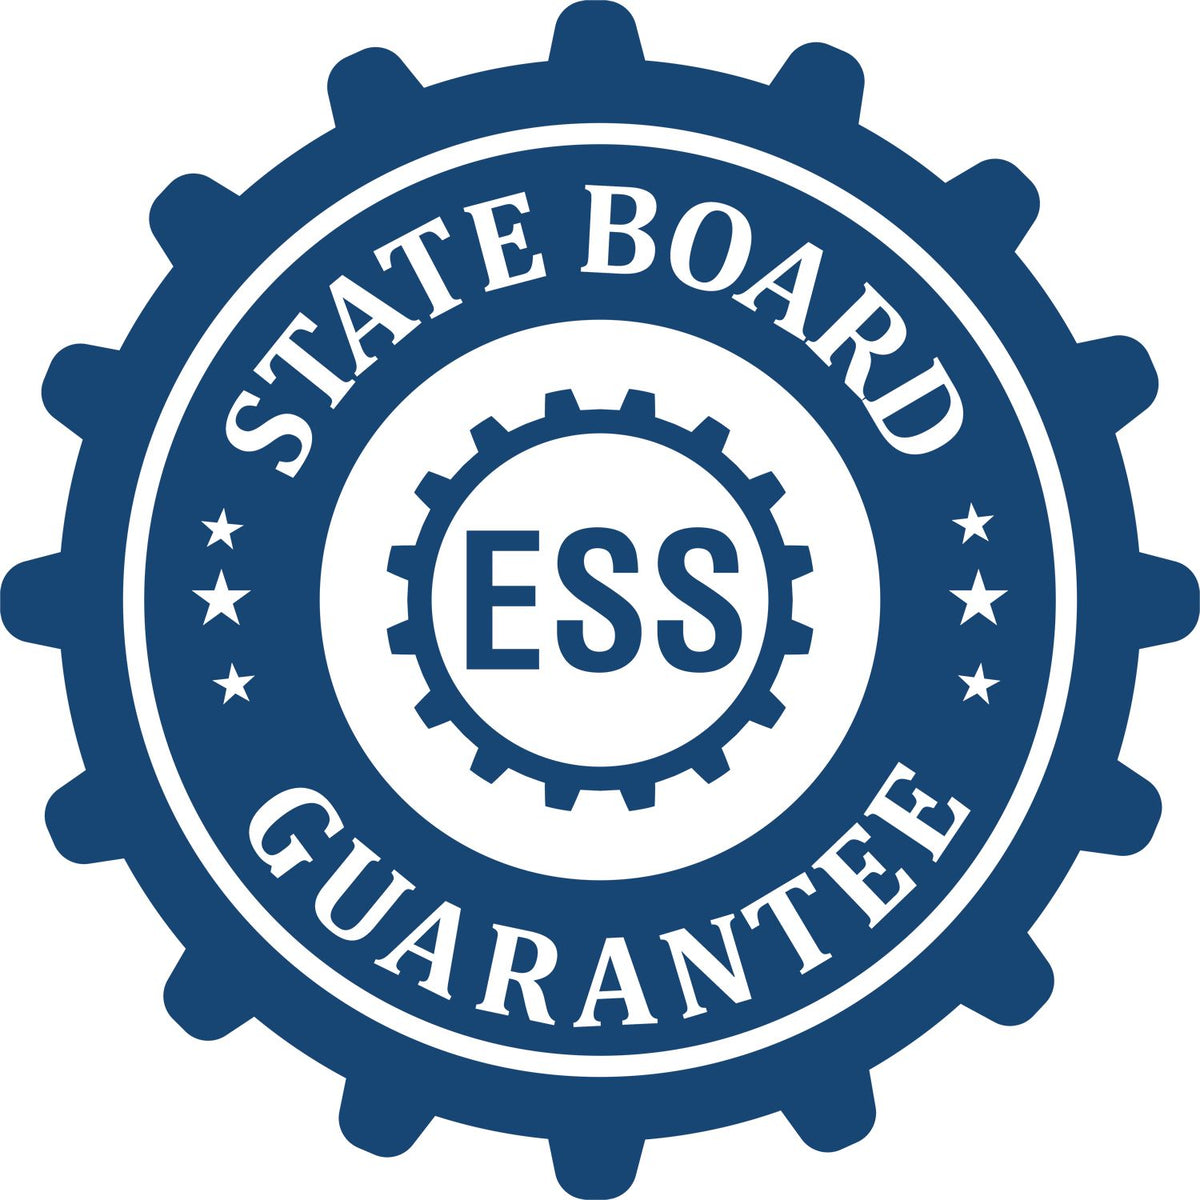 An emblem in a gear shape illustrating a state board guarantee for the Idaho Geologist Desk Seal